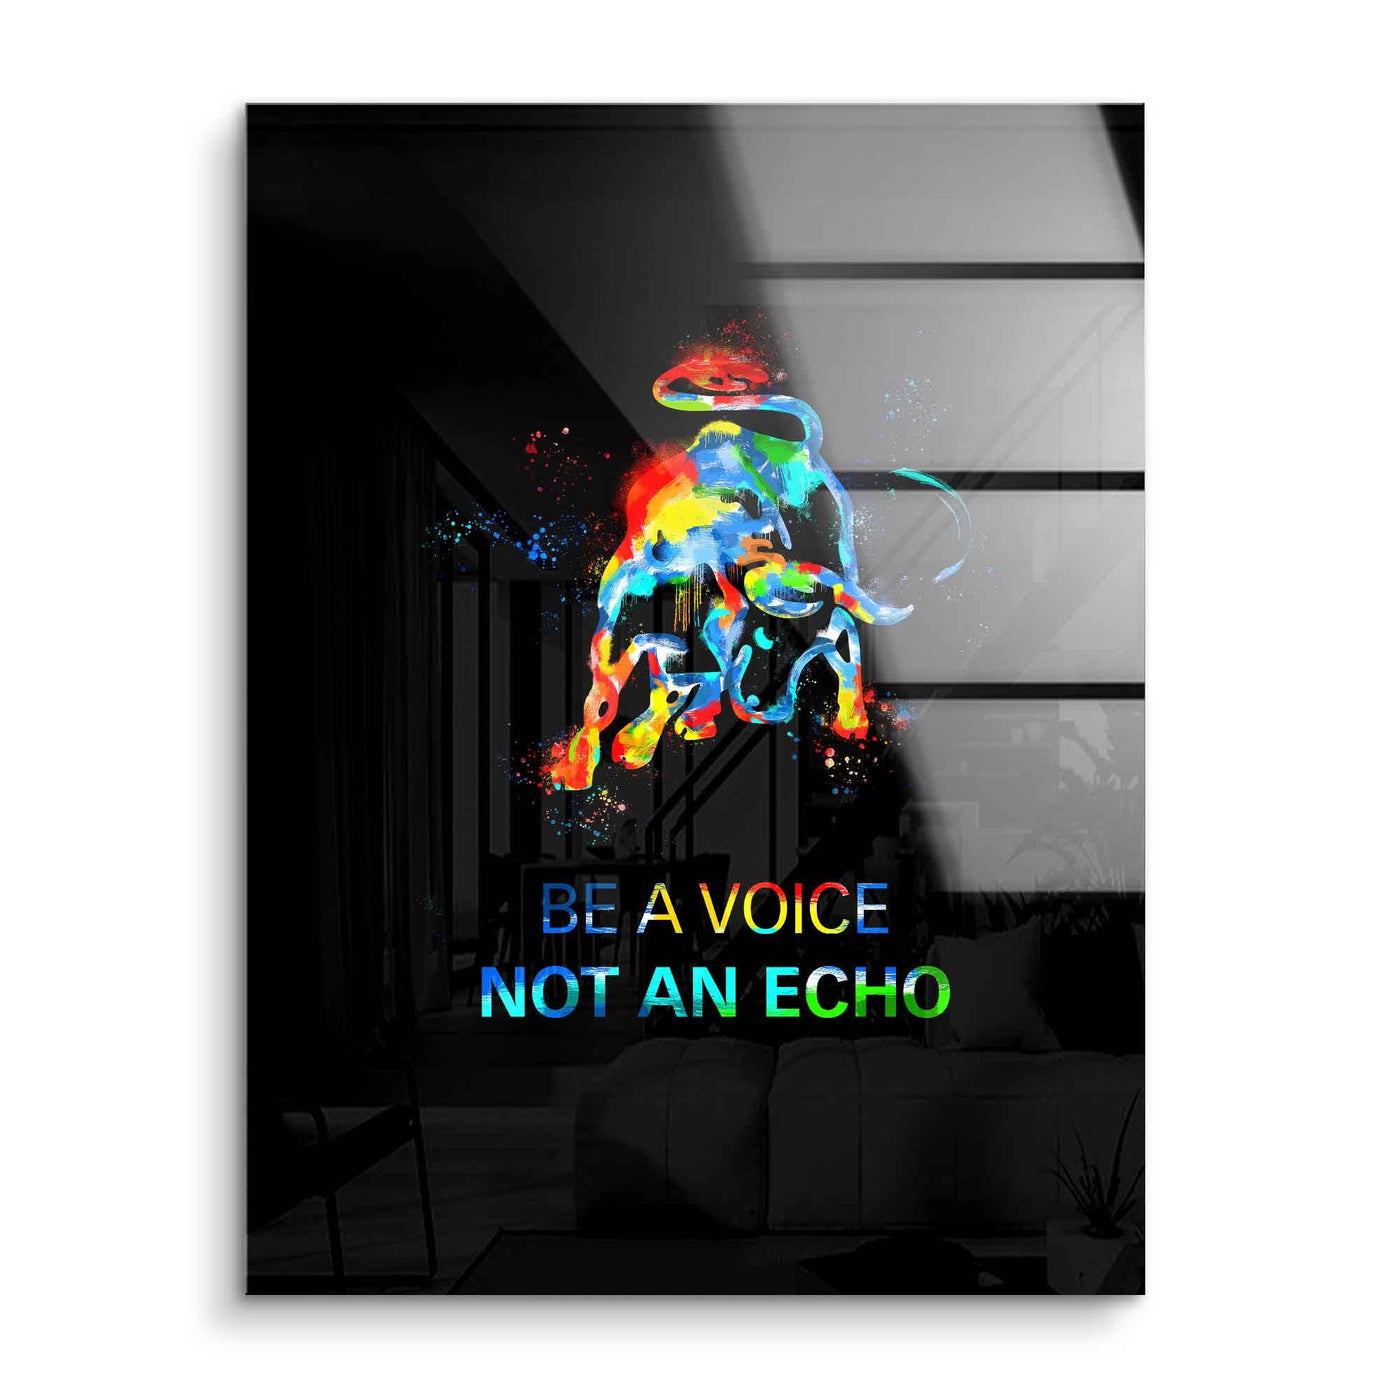 Be a voice - black edition